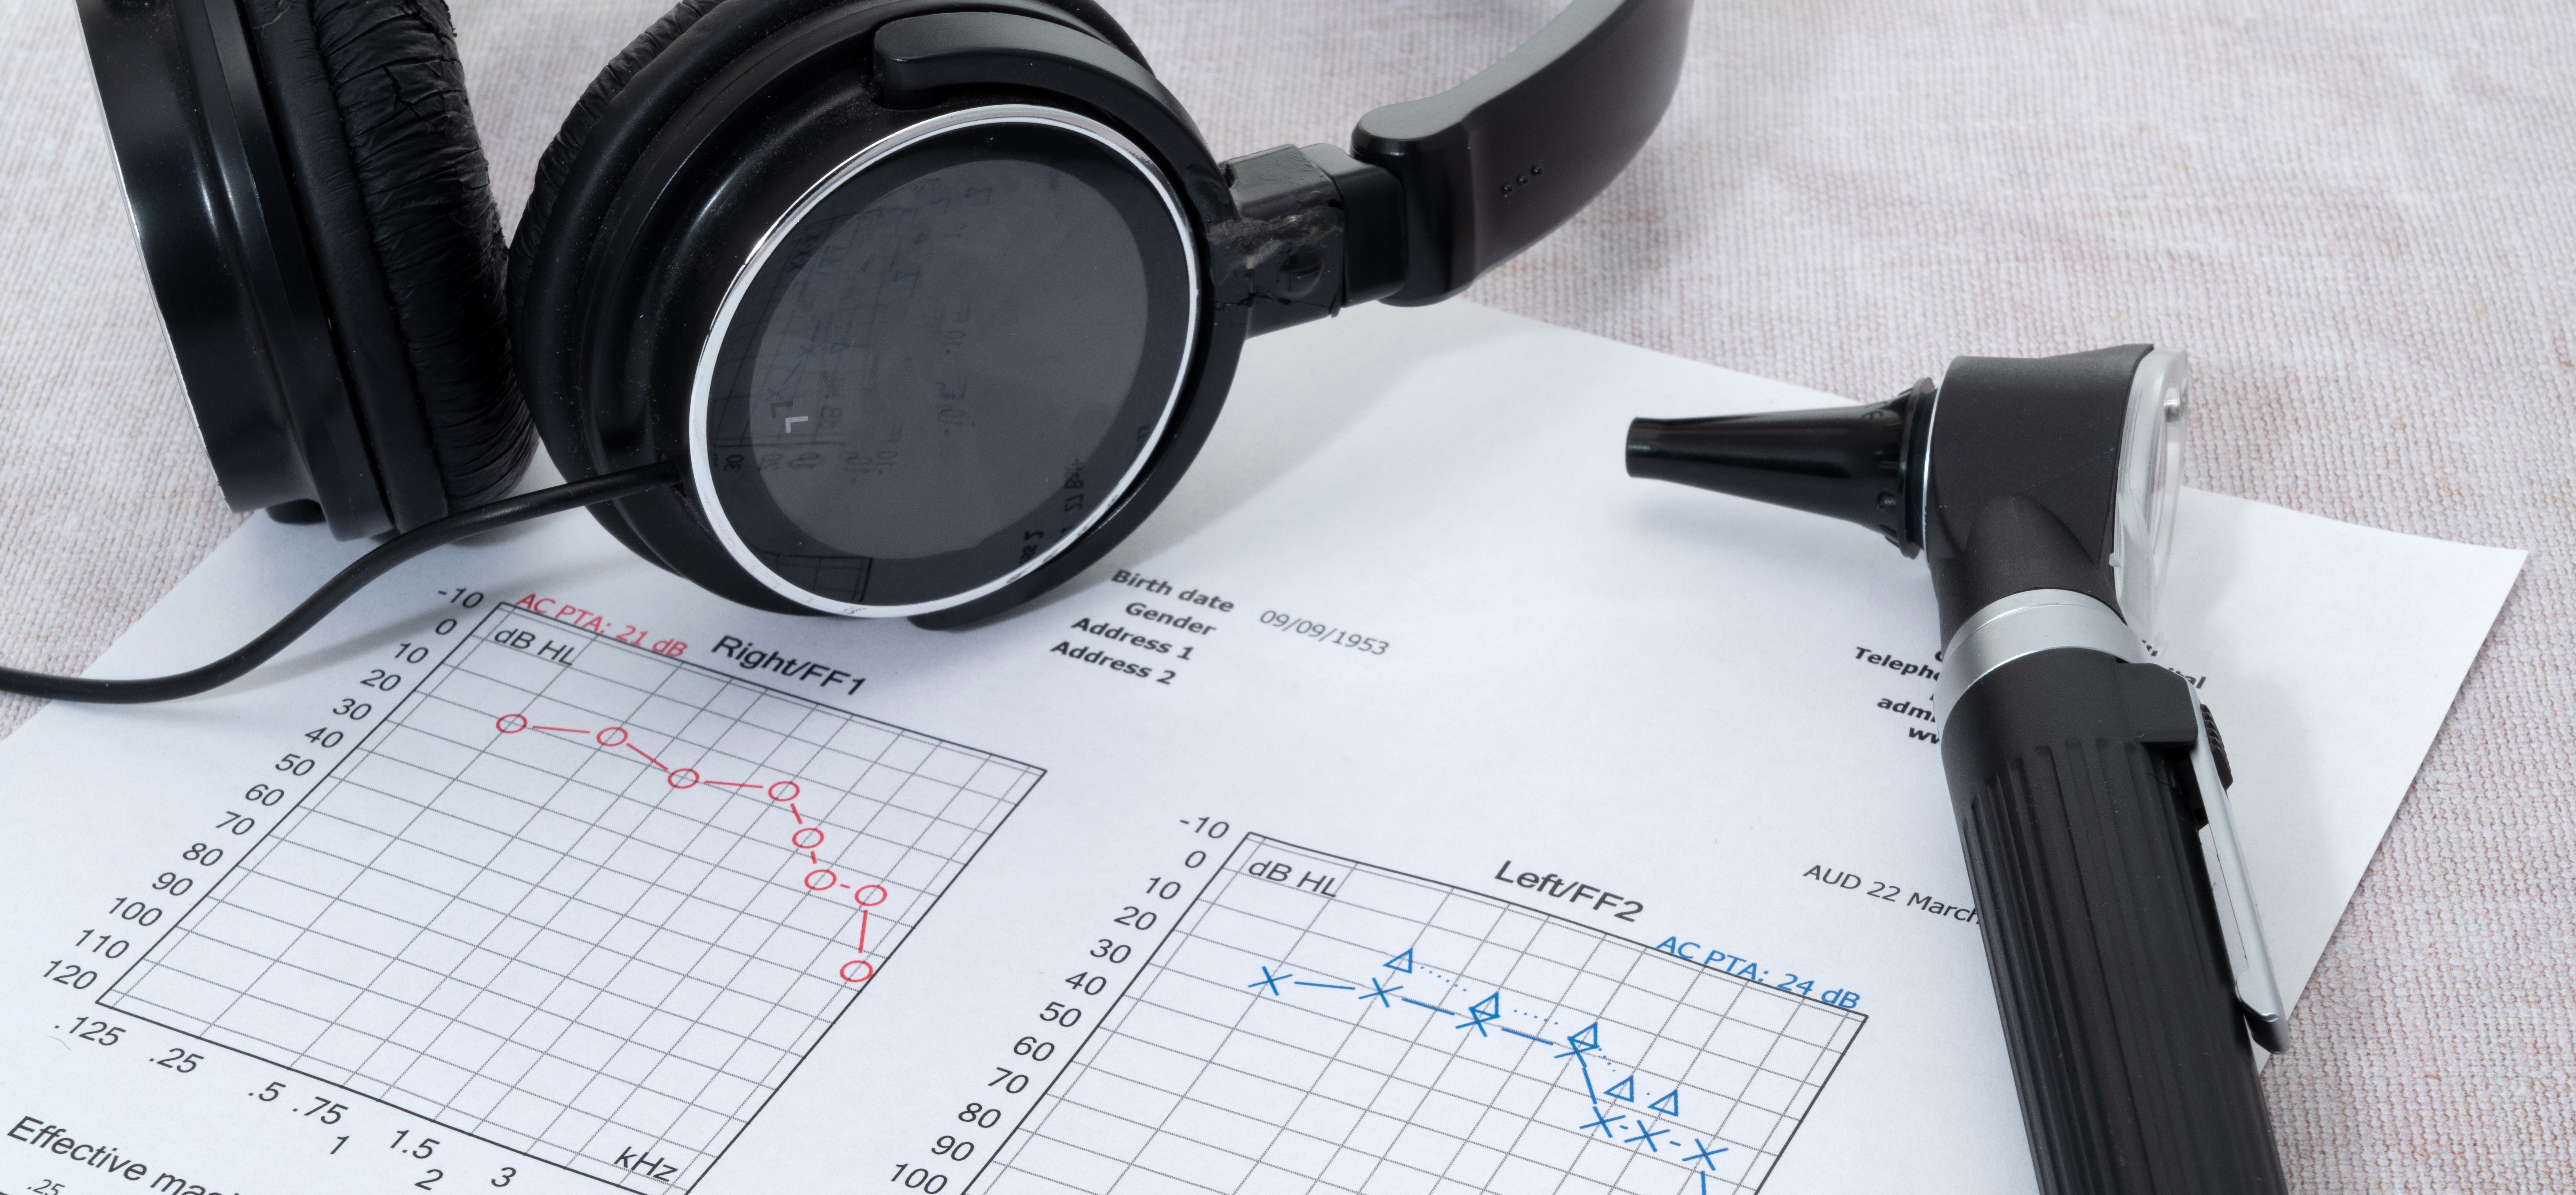 An otoscope and a pair of headphones rest on a printed audiogram